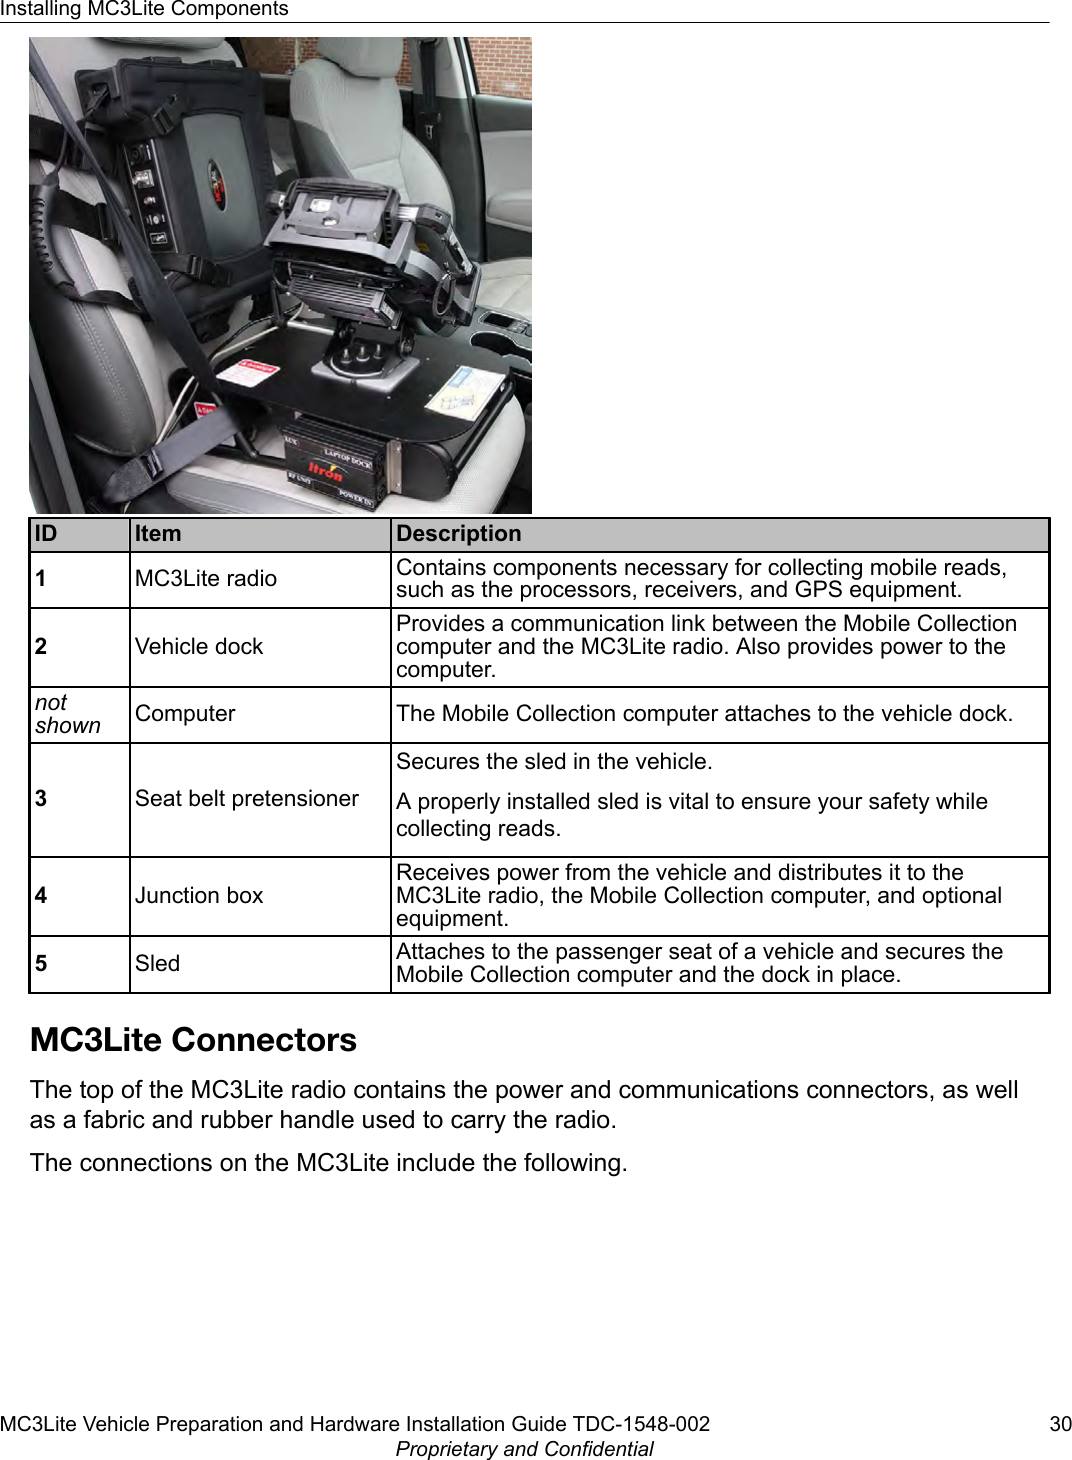 ID Item Description1MC3Lite radio Contains components necessary for collecting mobile reads,such as the processors, receivers, and GPS equipment.2Vehicle dockProvides a communication link between the Mobile Collectioncomputer and the MC3Lite radio. Also provides power to thecomputer.notshown Computer The Mobile Collection computer attaches to the vehicle dock.3Seat belt pretensionerSecures the sled in the vehicle.A properly installed sled is vital to ensure your safety whilecollecting reads.4Junction boxReceives power from the vehicle and distributes it to theMC3Lite radio, the Mobile Collection computer, and optionalequipment.5Sled Attaches to the passenger seat of a vehicle and secures theMobile Collection computer and the dock in place.MC3Lite ConnectorsThe top of the MC3Lite radio contains the power and communications connectors, as wellas a fabric and rubber handle used to carry the radio.The connections on the MC3Lite include the following.Installing MC3Lite ComponentsMC3Lite Vehicle Preparation and Hardware Installation Guide TDC-1548-002 30Proprietary and Confidential